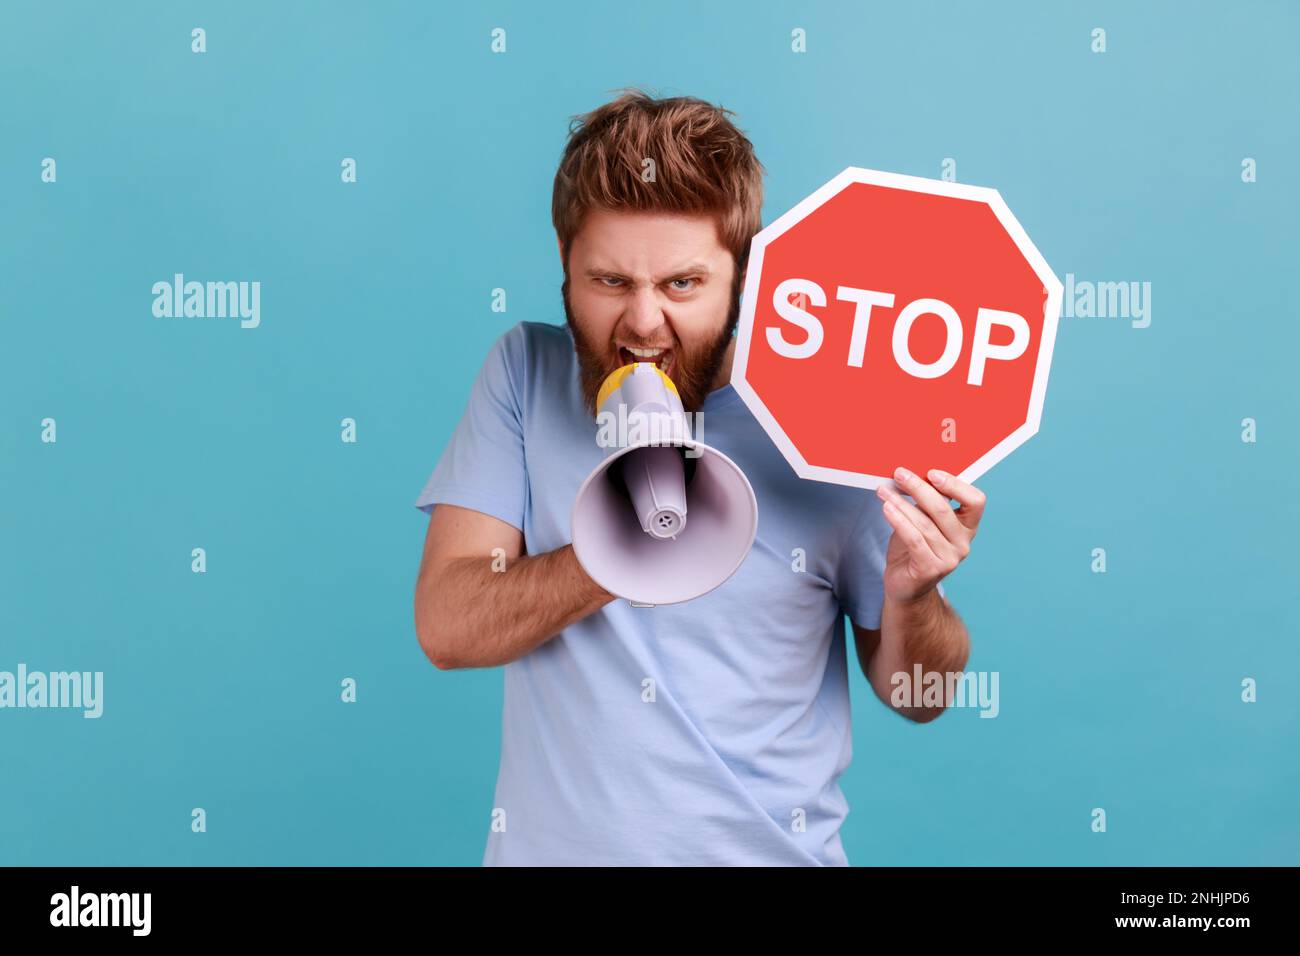 Portrait of aggressive angry bearded man looking at camera, screaming in loud speaker, holding red stop sign and megaphone in his hands. Indoor studio shot isolated on blue background. Stock Photo